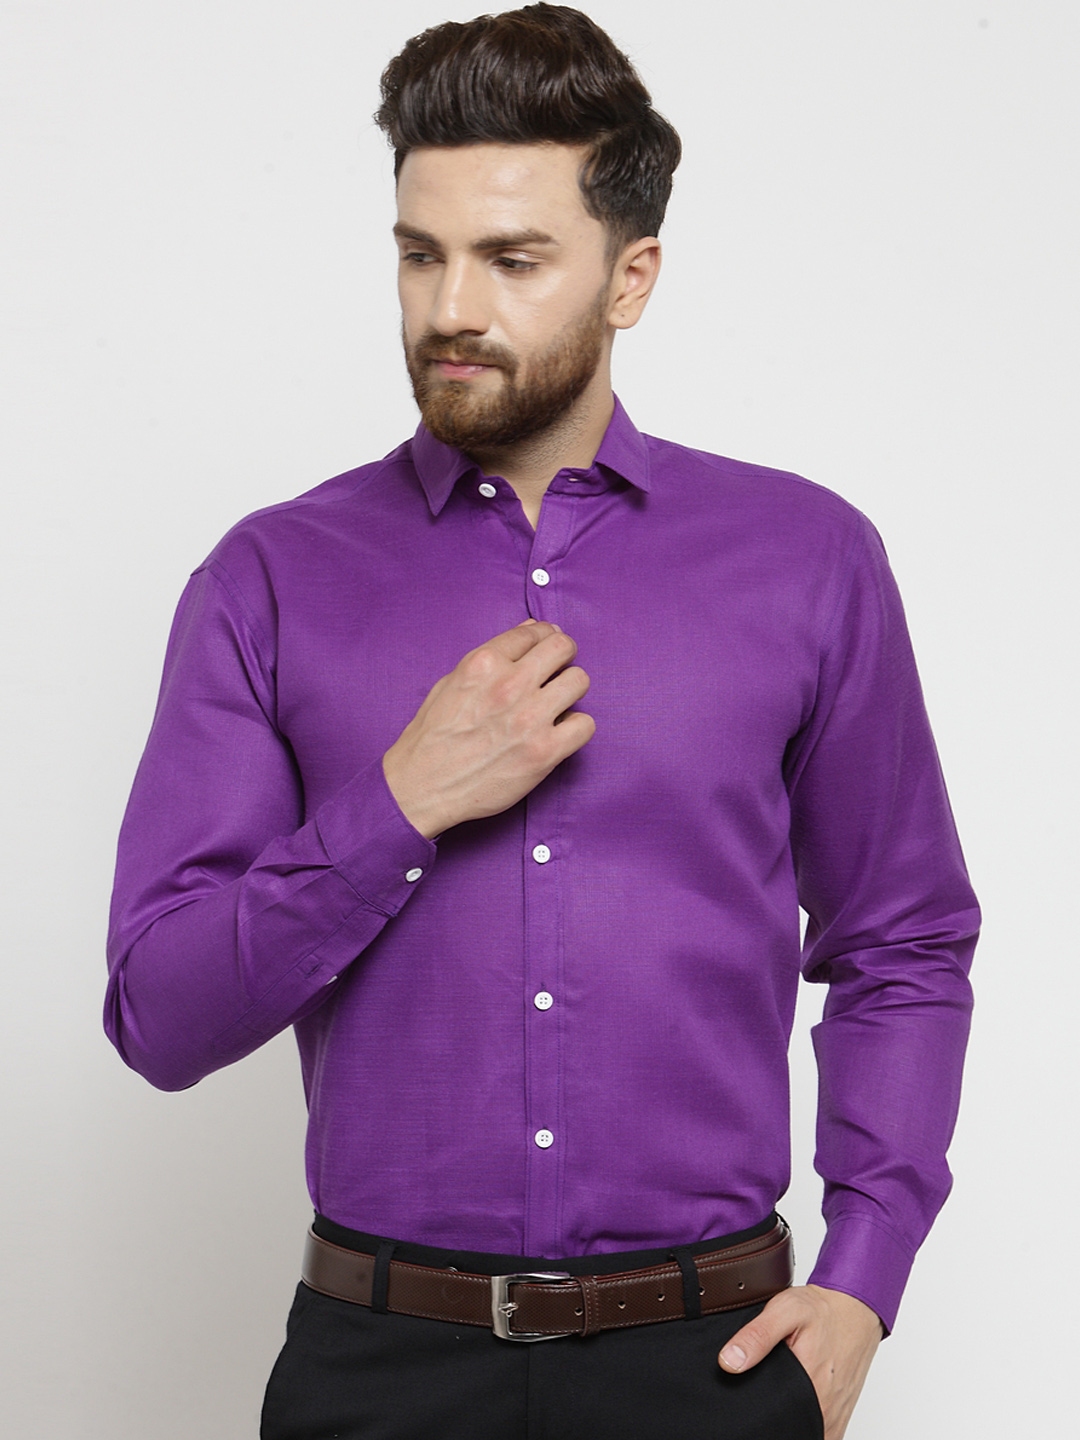 Purple Fitted Shirt | vlr.eng.br